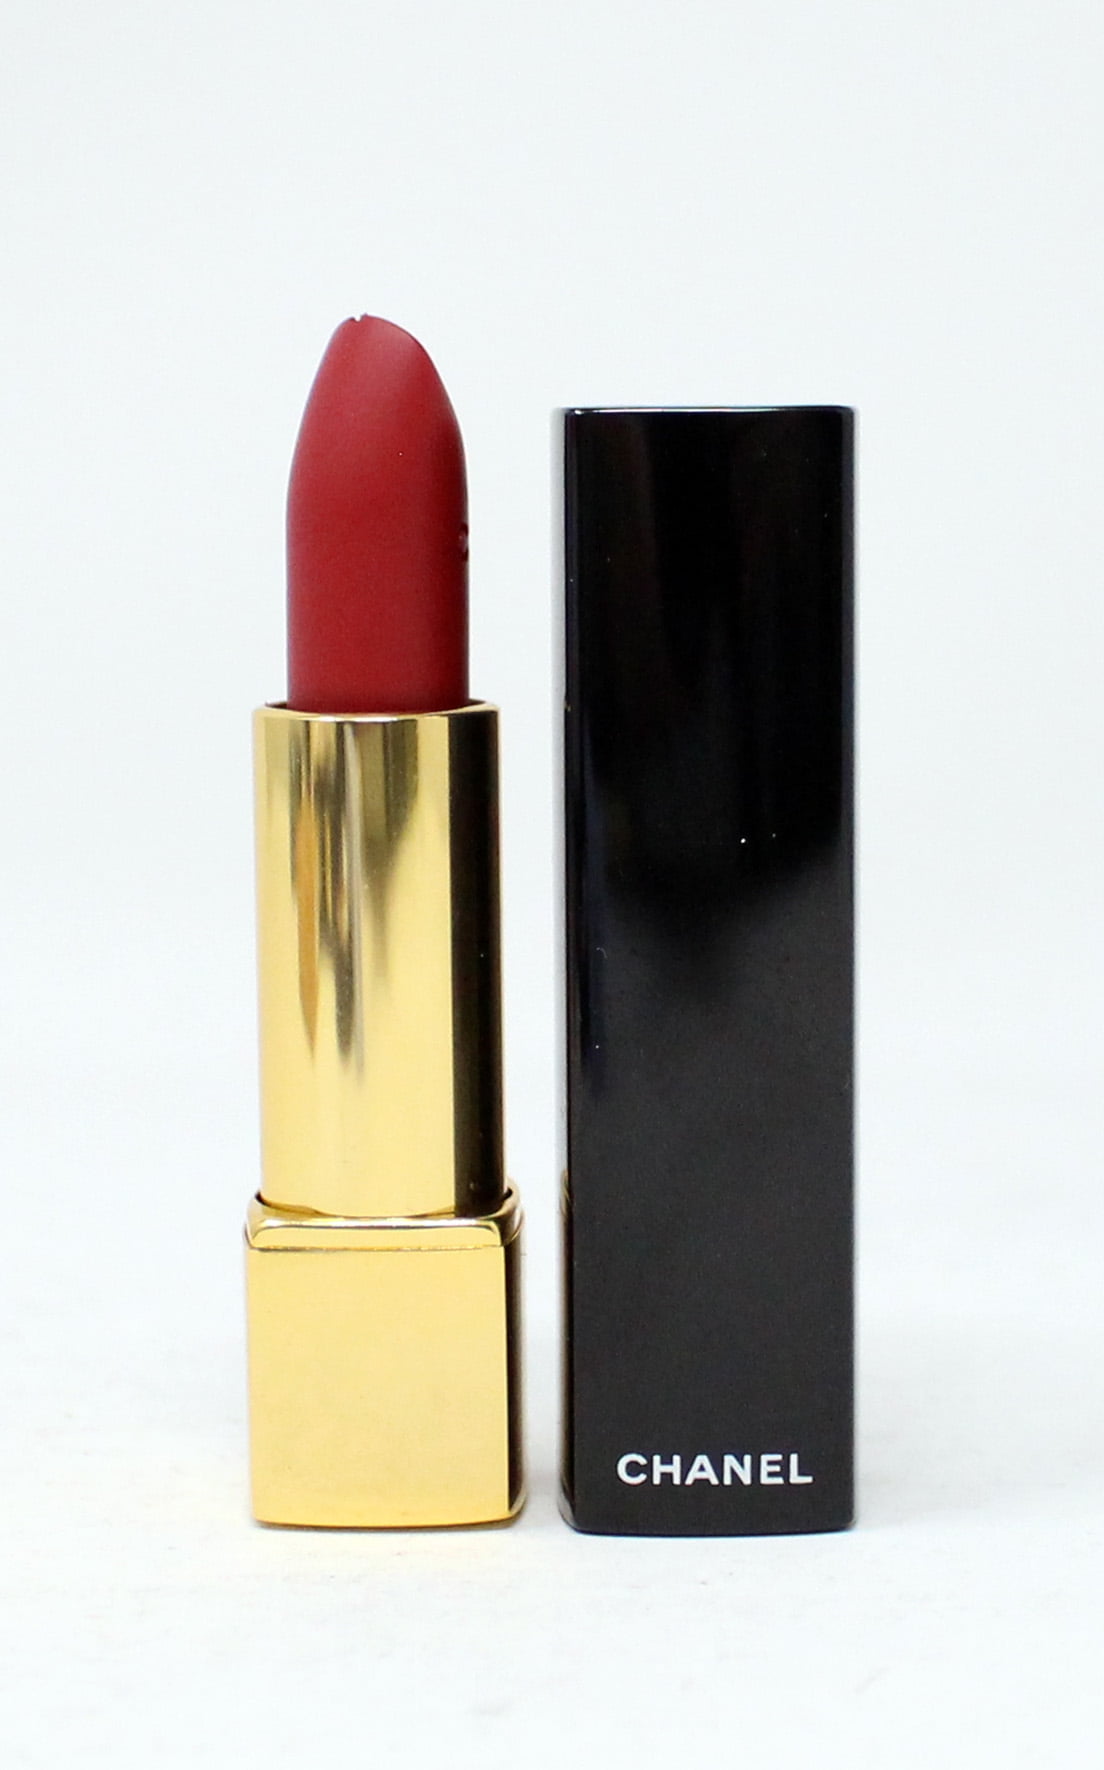 CHANEL, Makeup, Chanel Rouge A Levres Crme Lipstick Passion Rouge Red  Passion No 5 5045